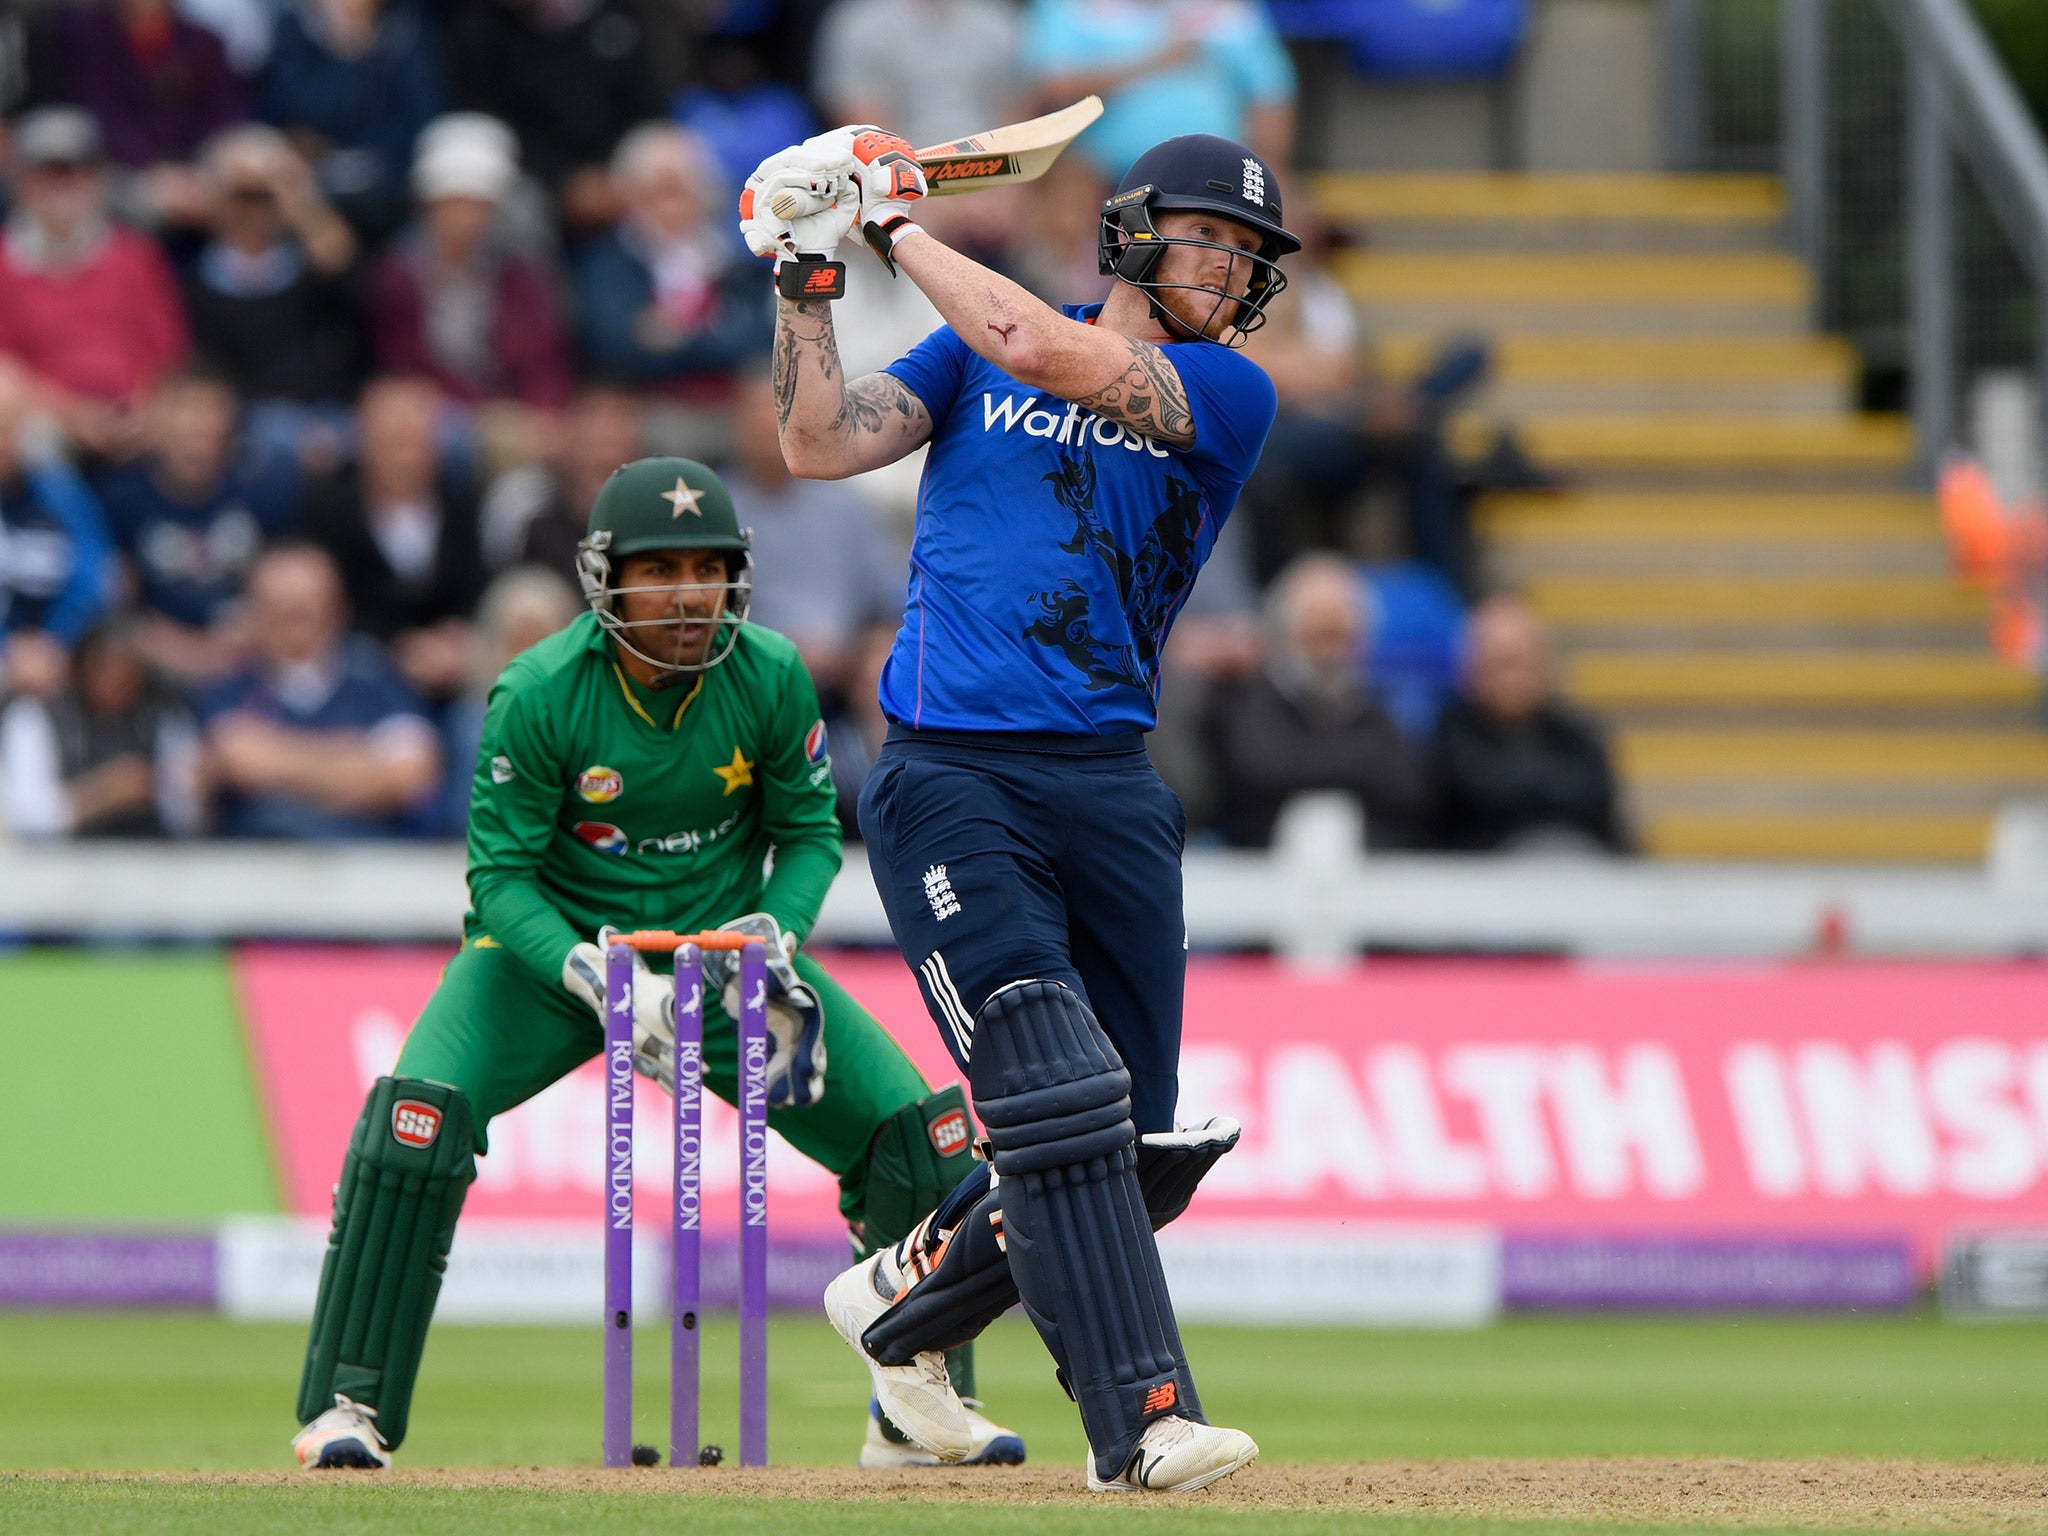 Stokes hit a career-best 75 for England